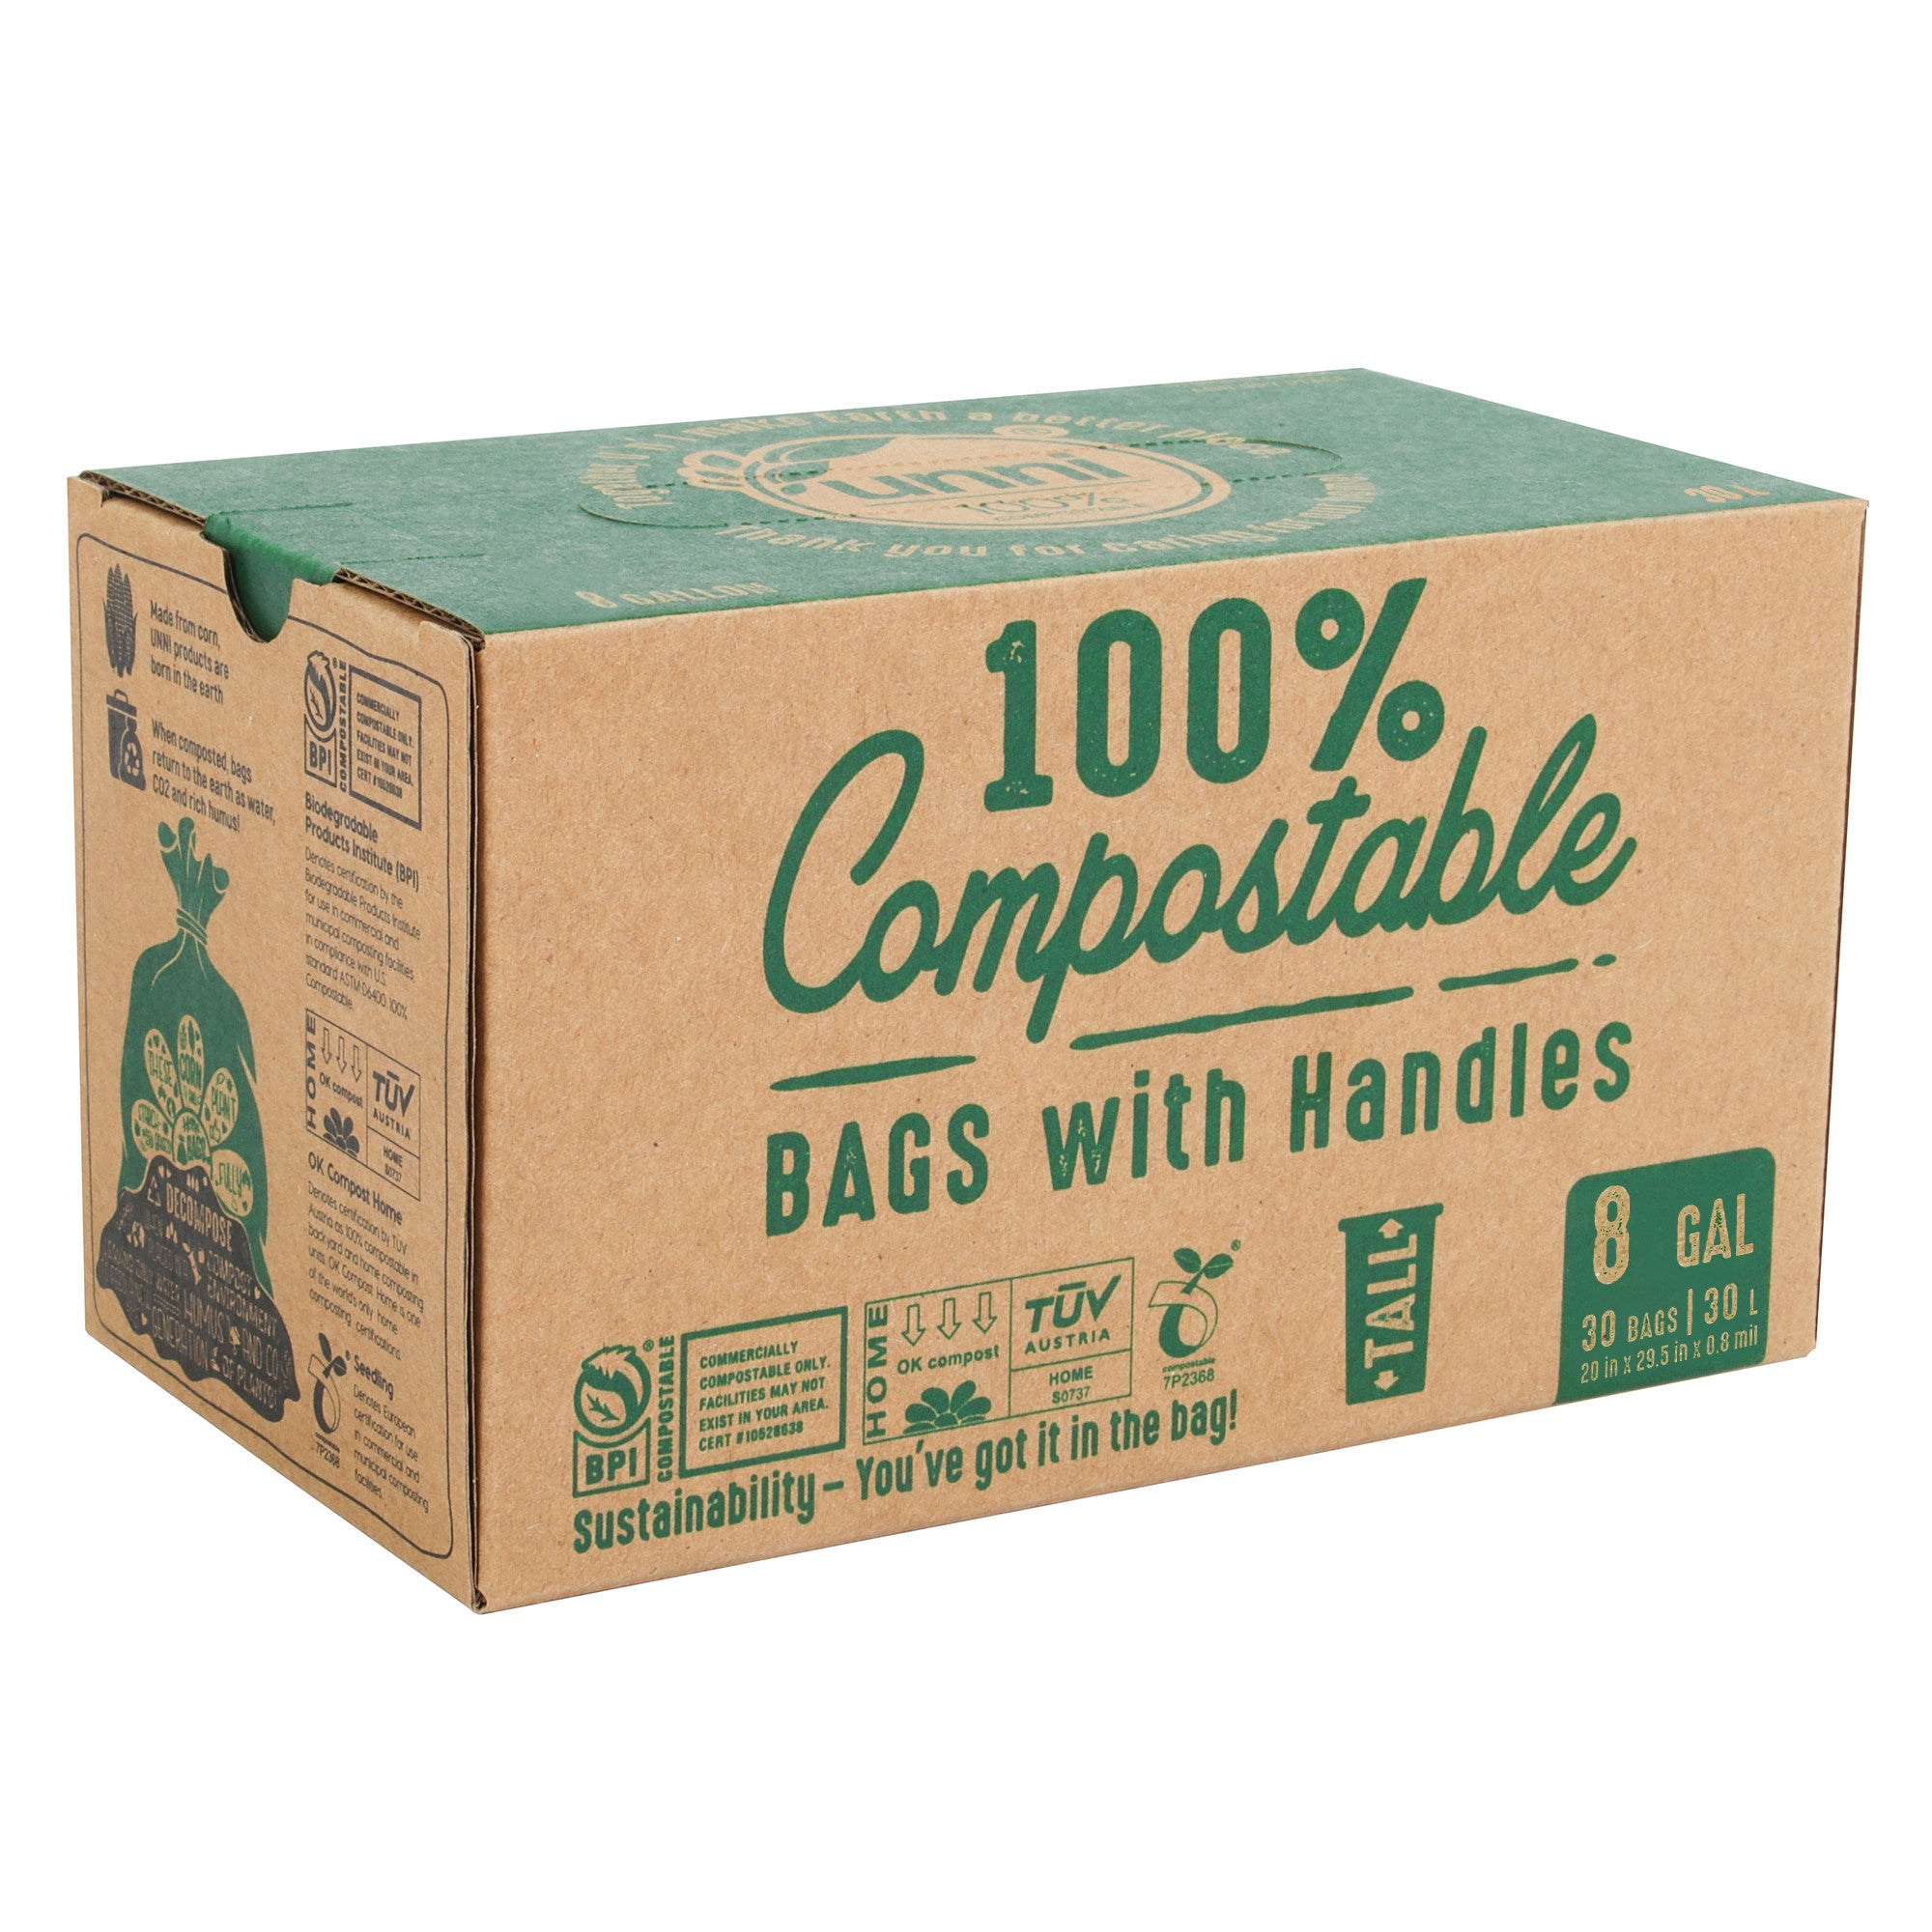 8 Gallon, 30 Liter, Compostable Bags with Handles